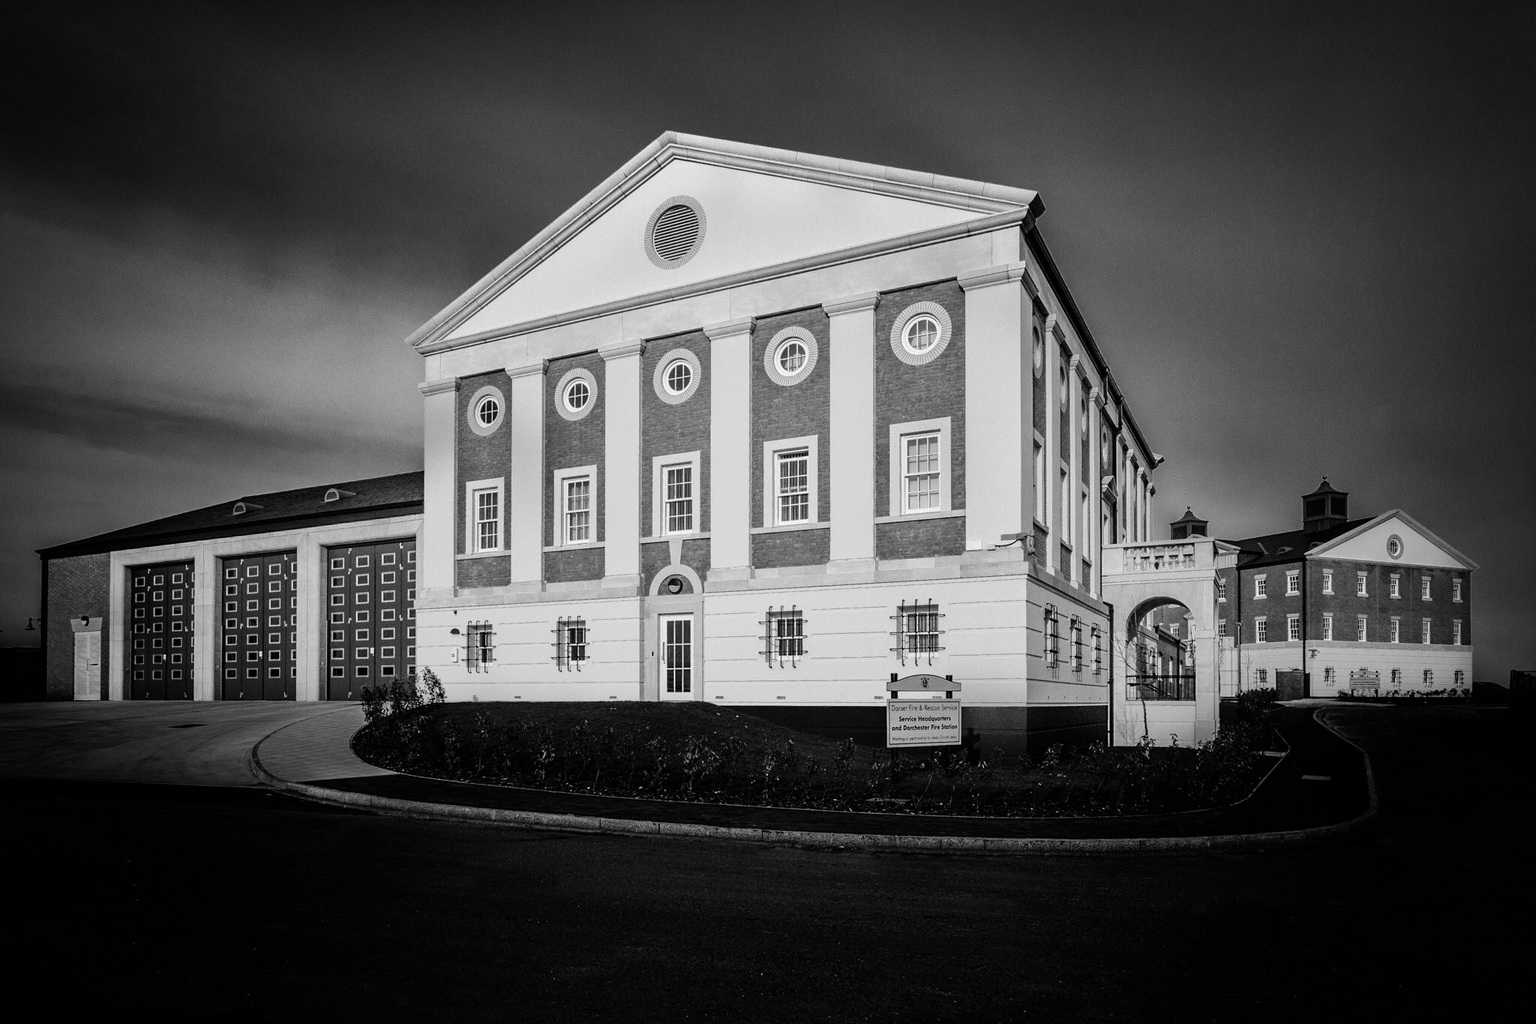  Dorchester Fire Station and DFRS HQ. Pictures of Poundbury.  